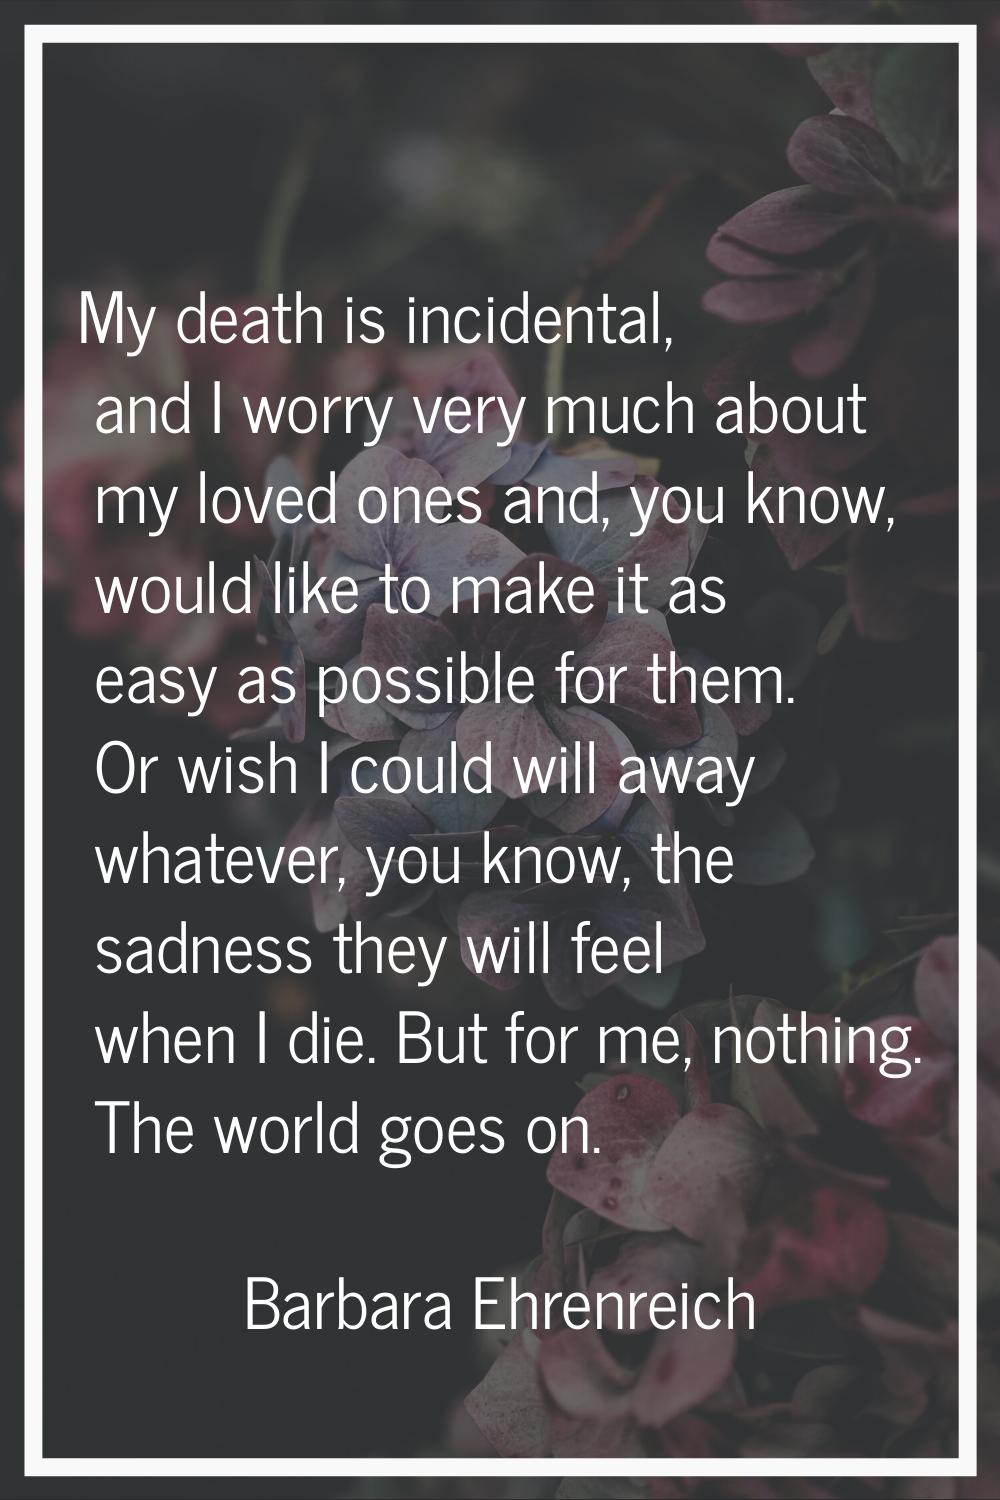 My death is incidental, and I worry very much about my loved ones and, you know, would like to make